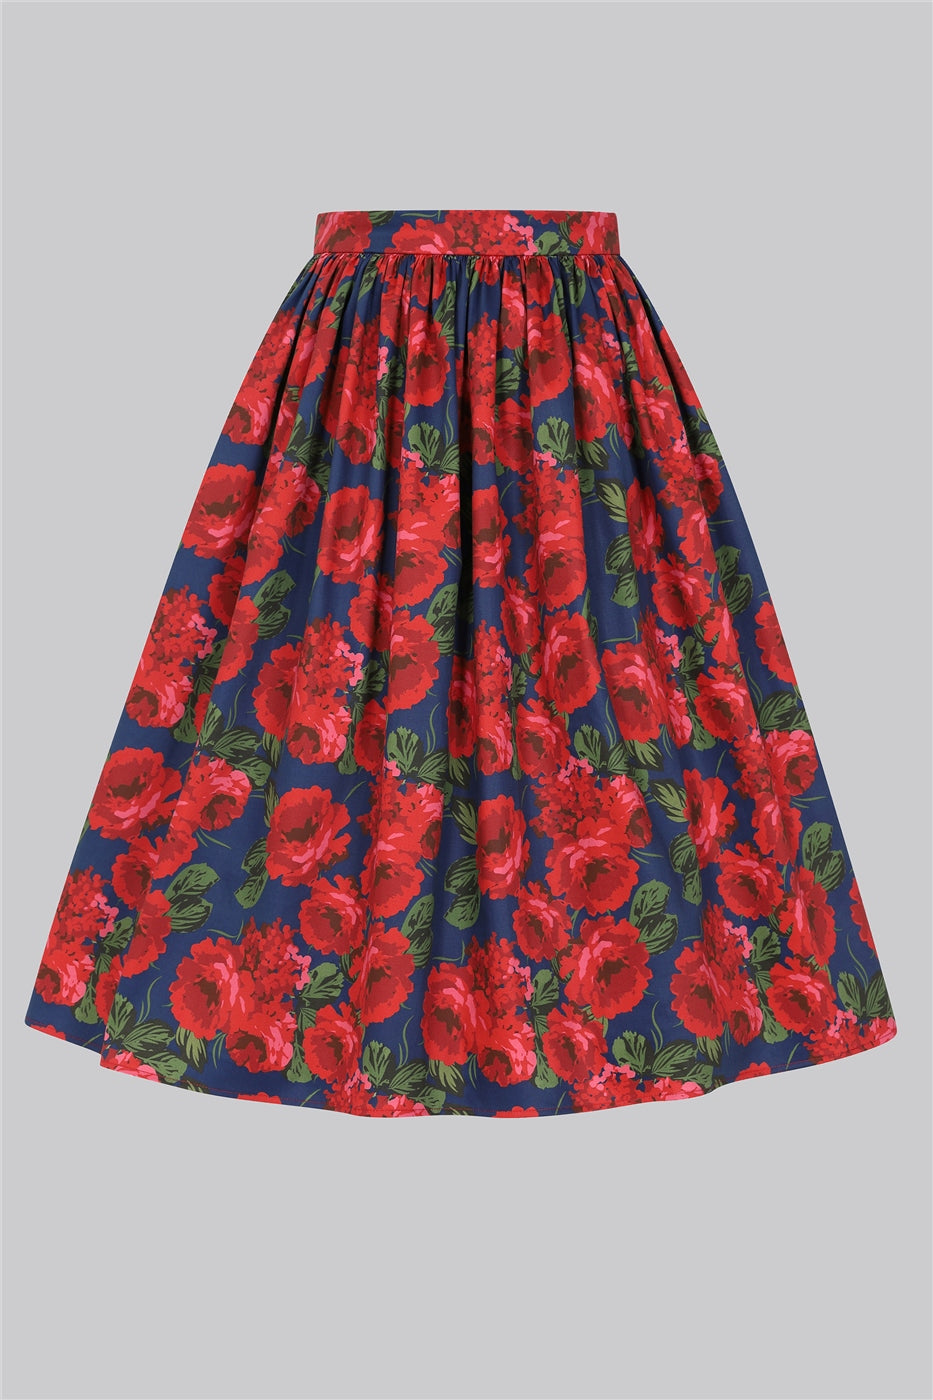 Jasmine Roses Swing Skirt by Collectif